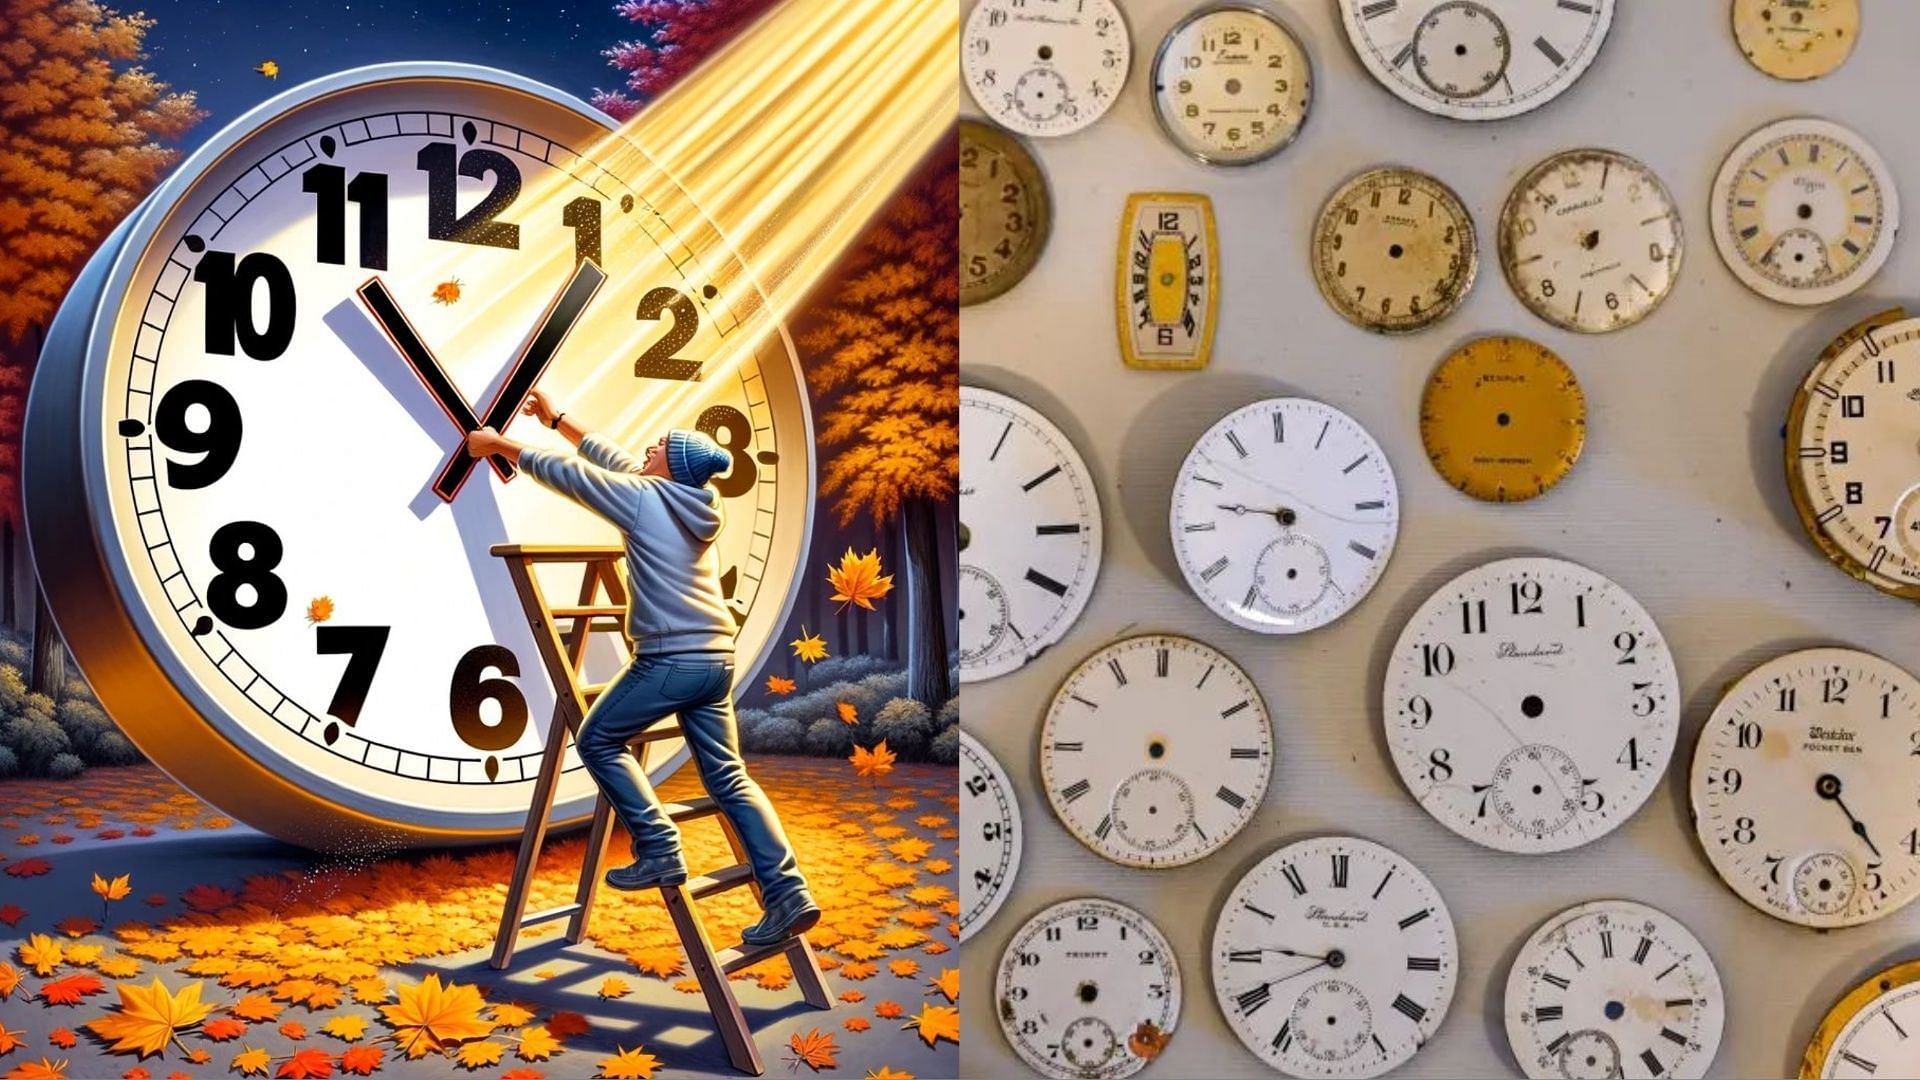 Roblox on X: It's time to Fall Back! Daylight Savings Time ends